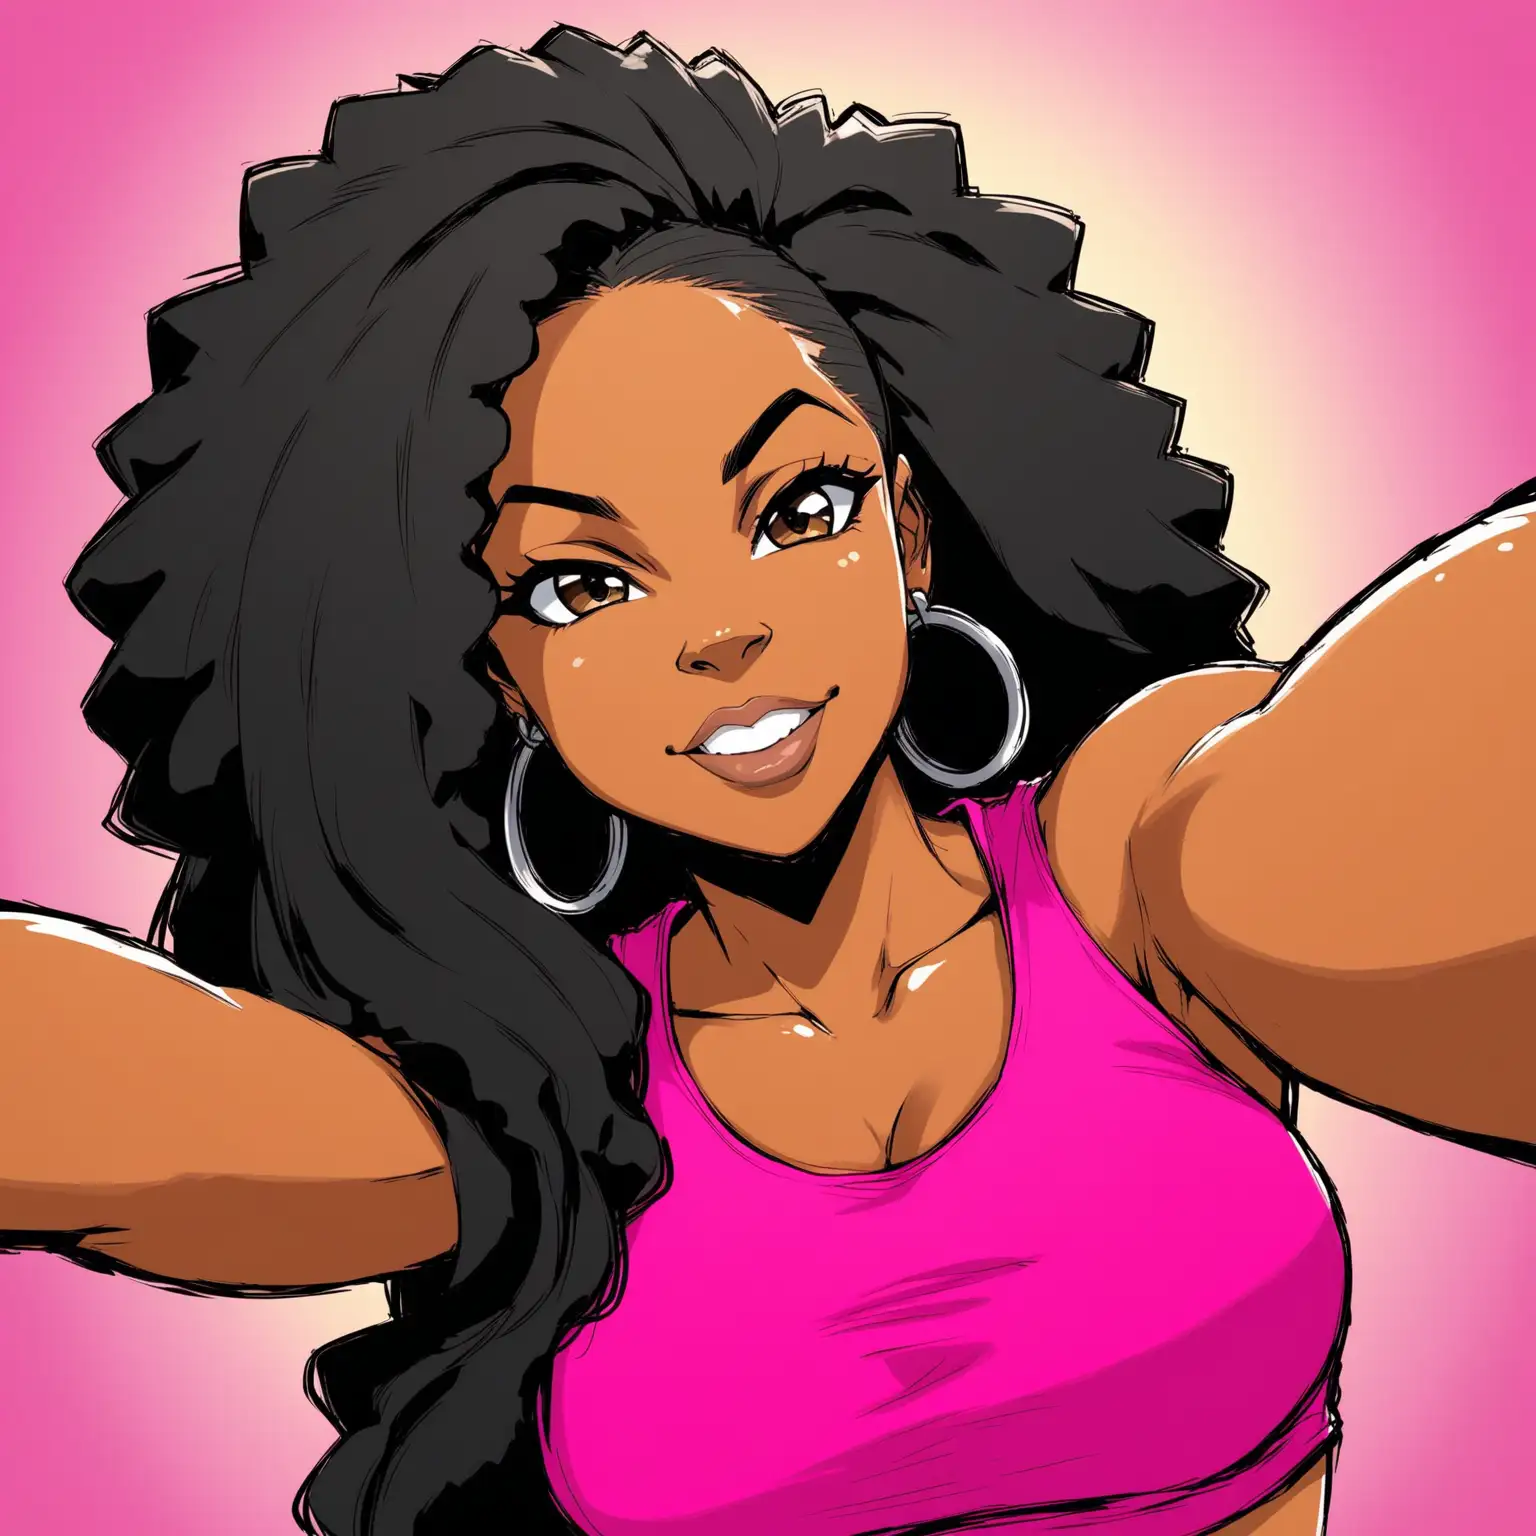 create the boondocks cartoon styled character,  dark skin african american woman with long black hair, with hot pink crop top, selfie picture